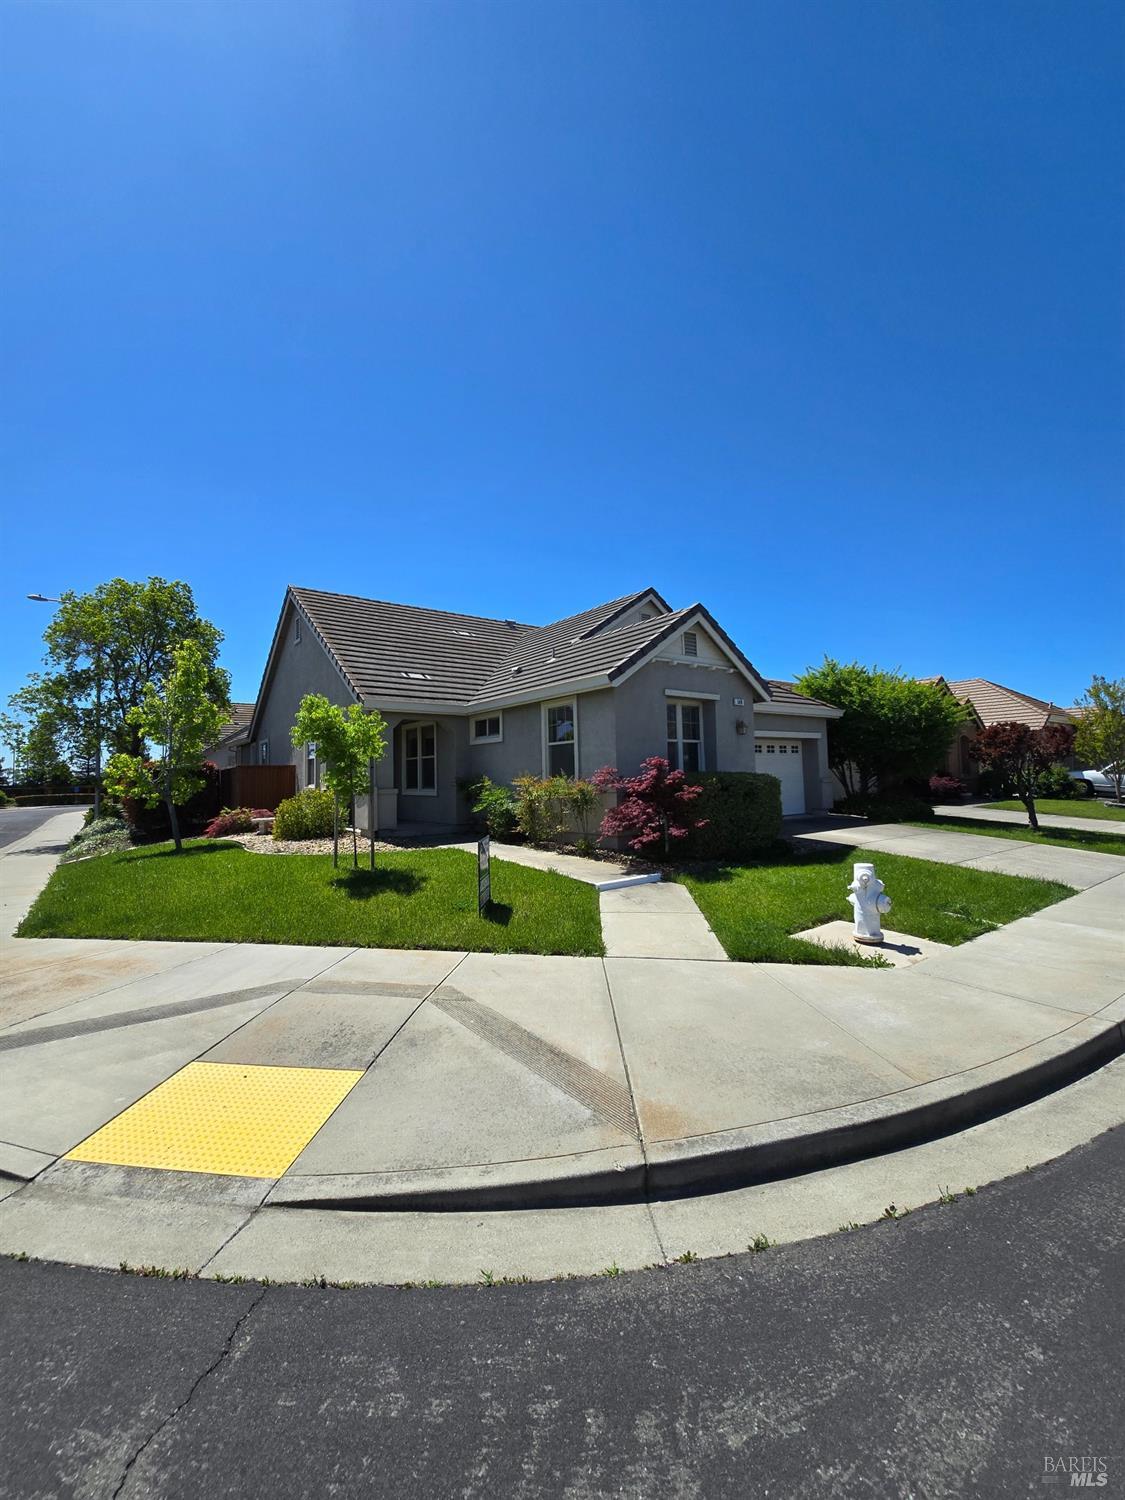 Photo of 548 White Pine St in Vacaville, CA